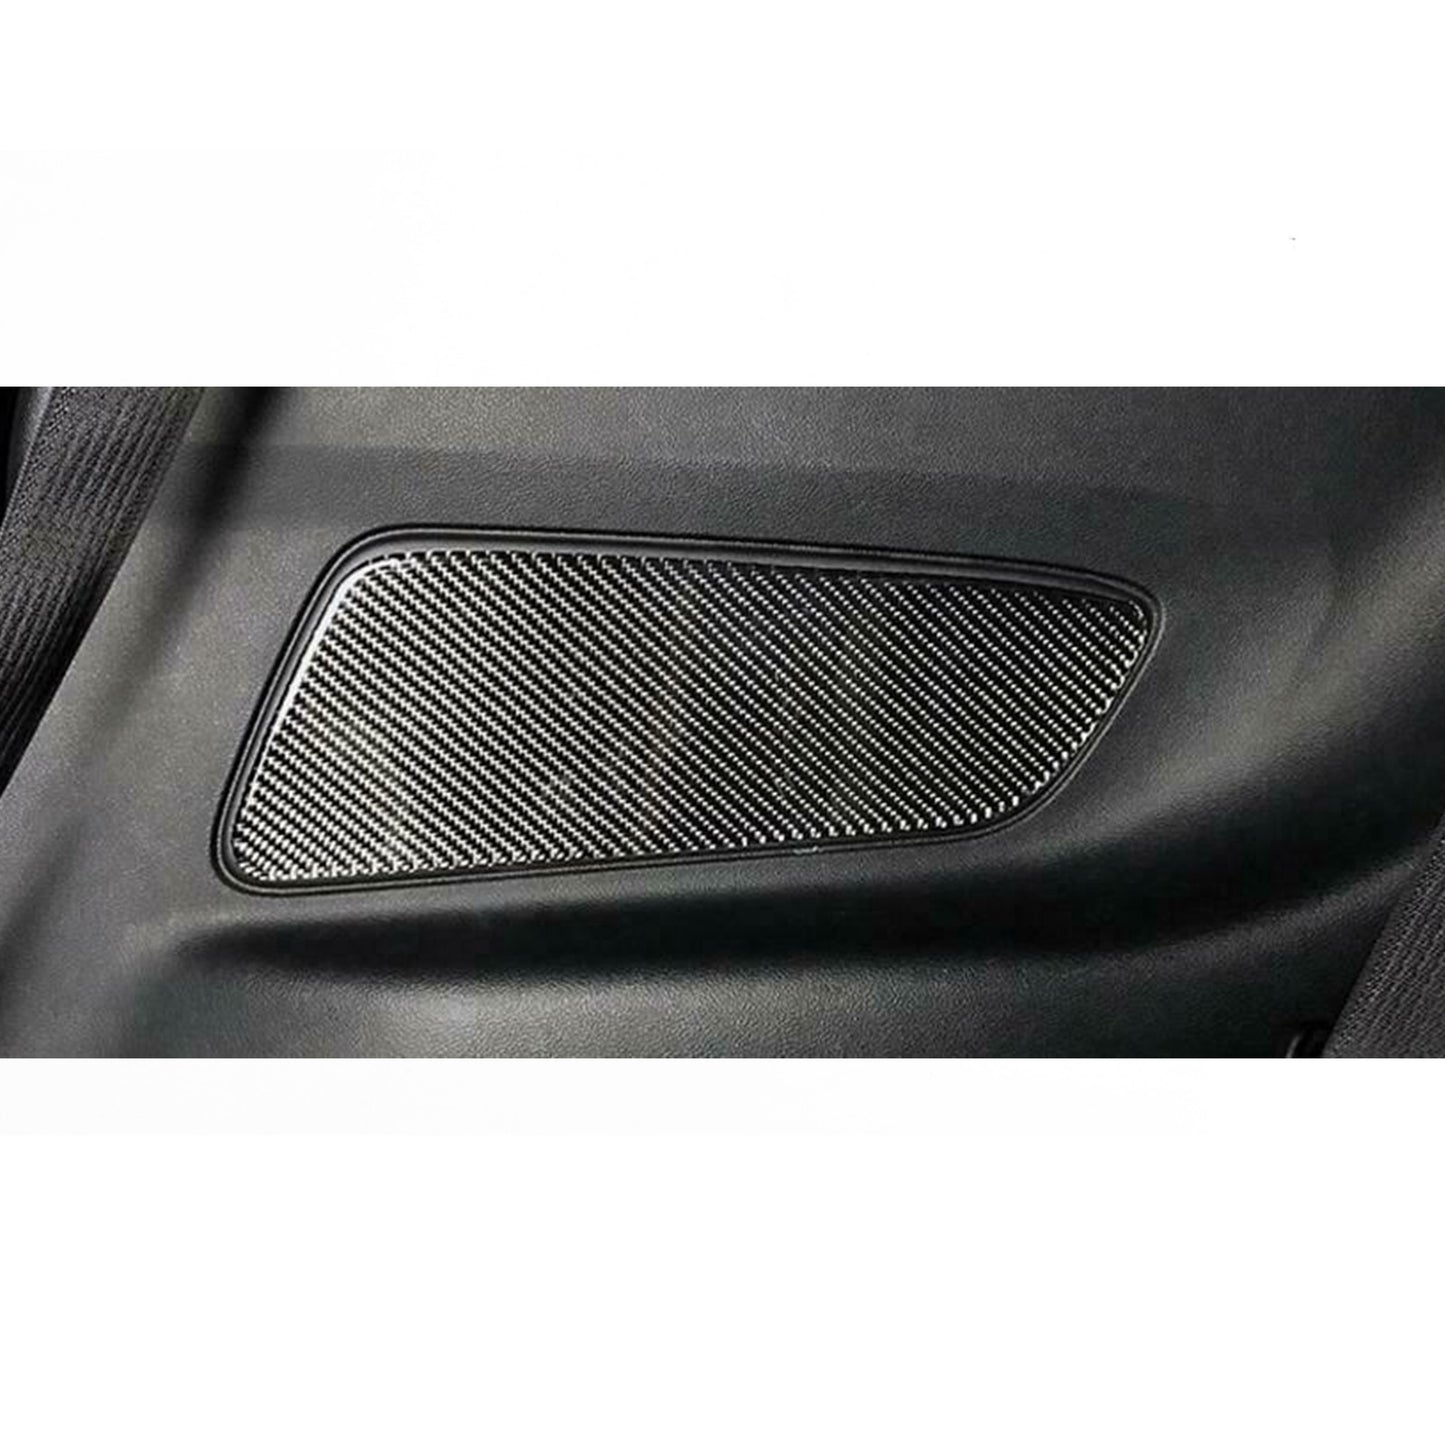 Real Carbon Fiber Rear Seat Door Panel Cover Trim For Ford Mustang 2015-2019